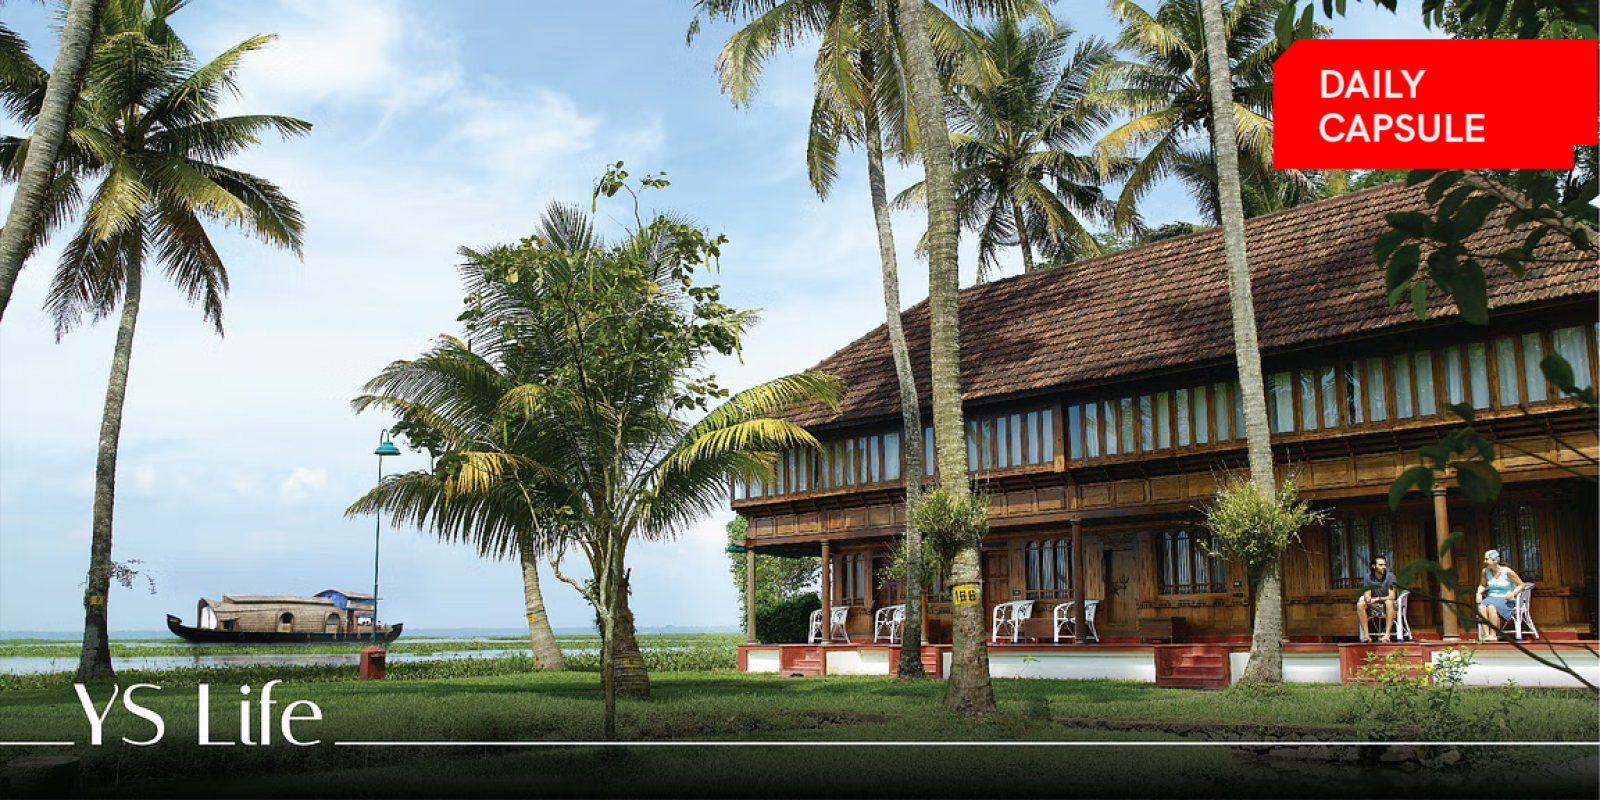 Experience Kuttanad at Coconut Lagoon; Uncle Peter’s Pancakes spill the secret sauce